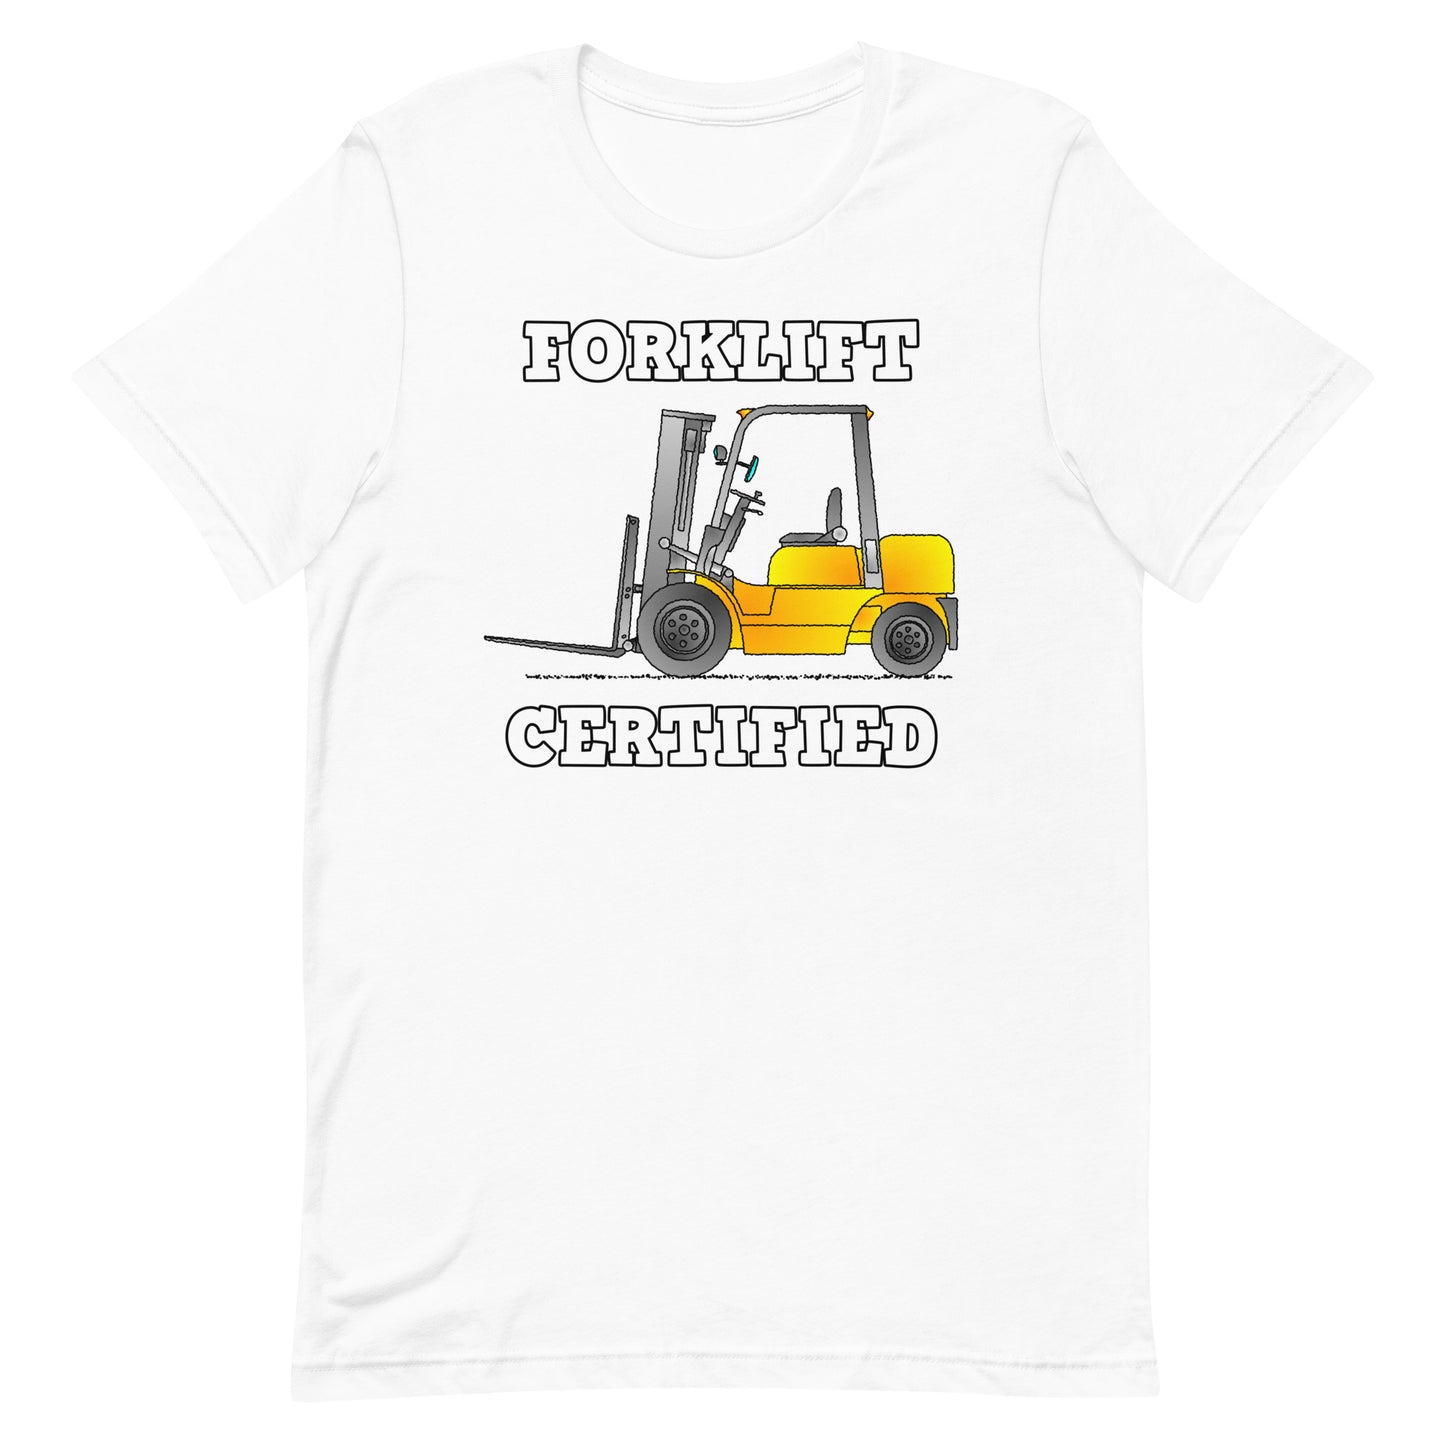 Forklift Certified T-Shirt, Forklift Truck Operator, Funny Tee